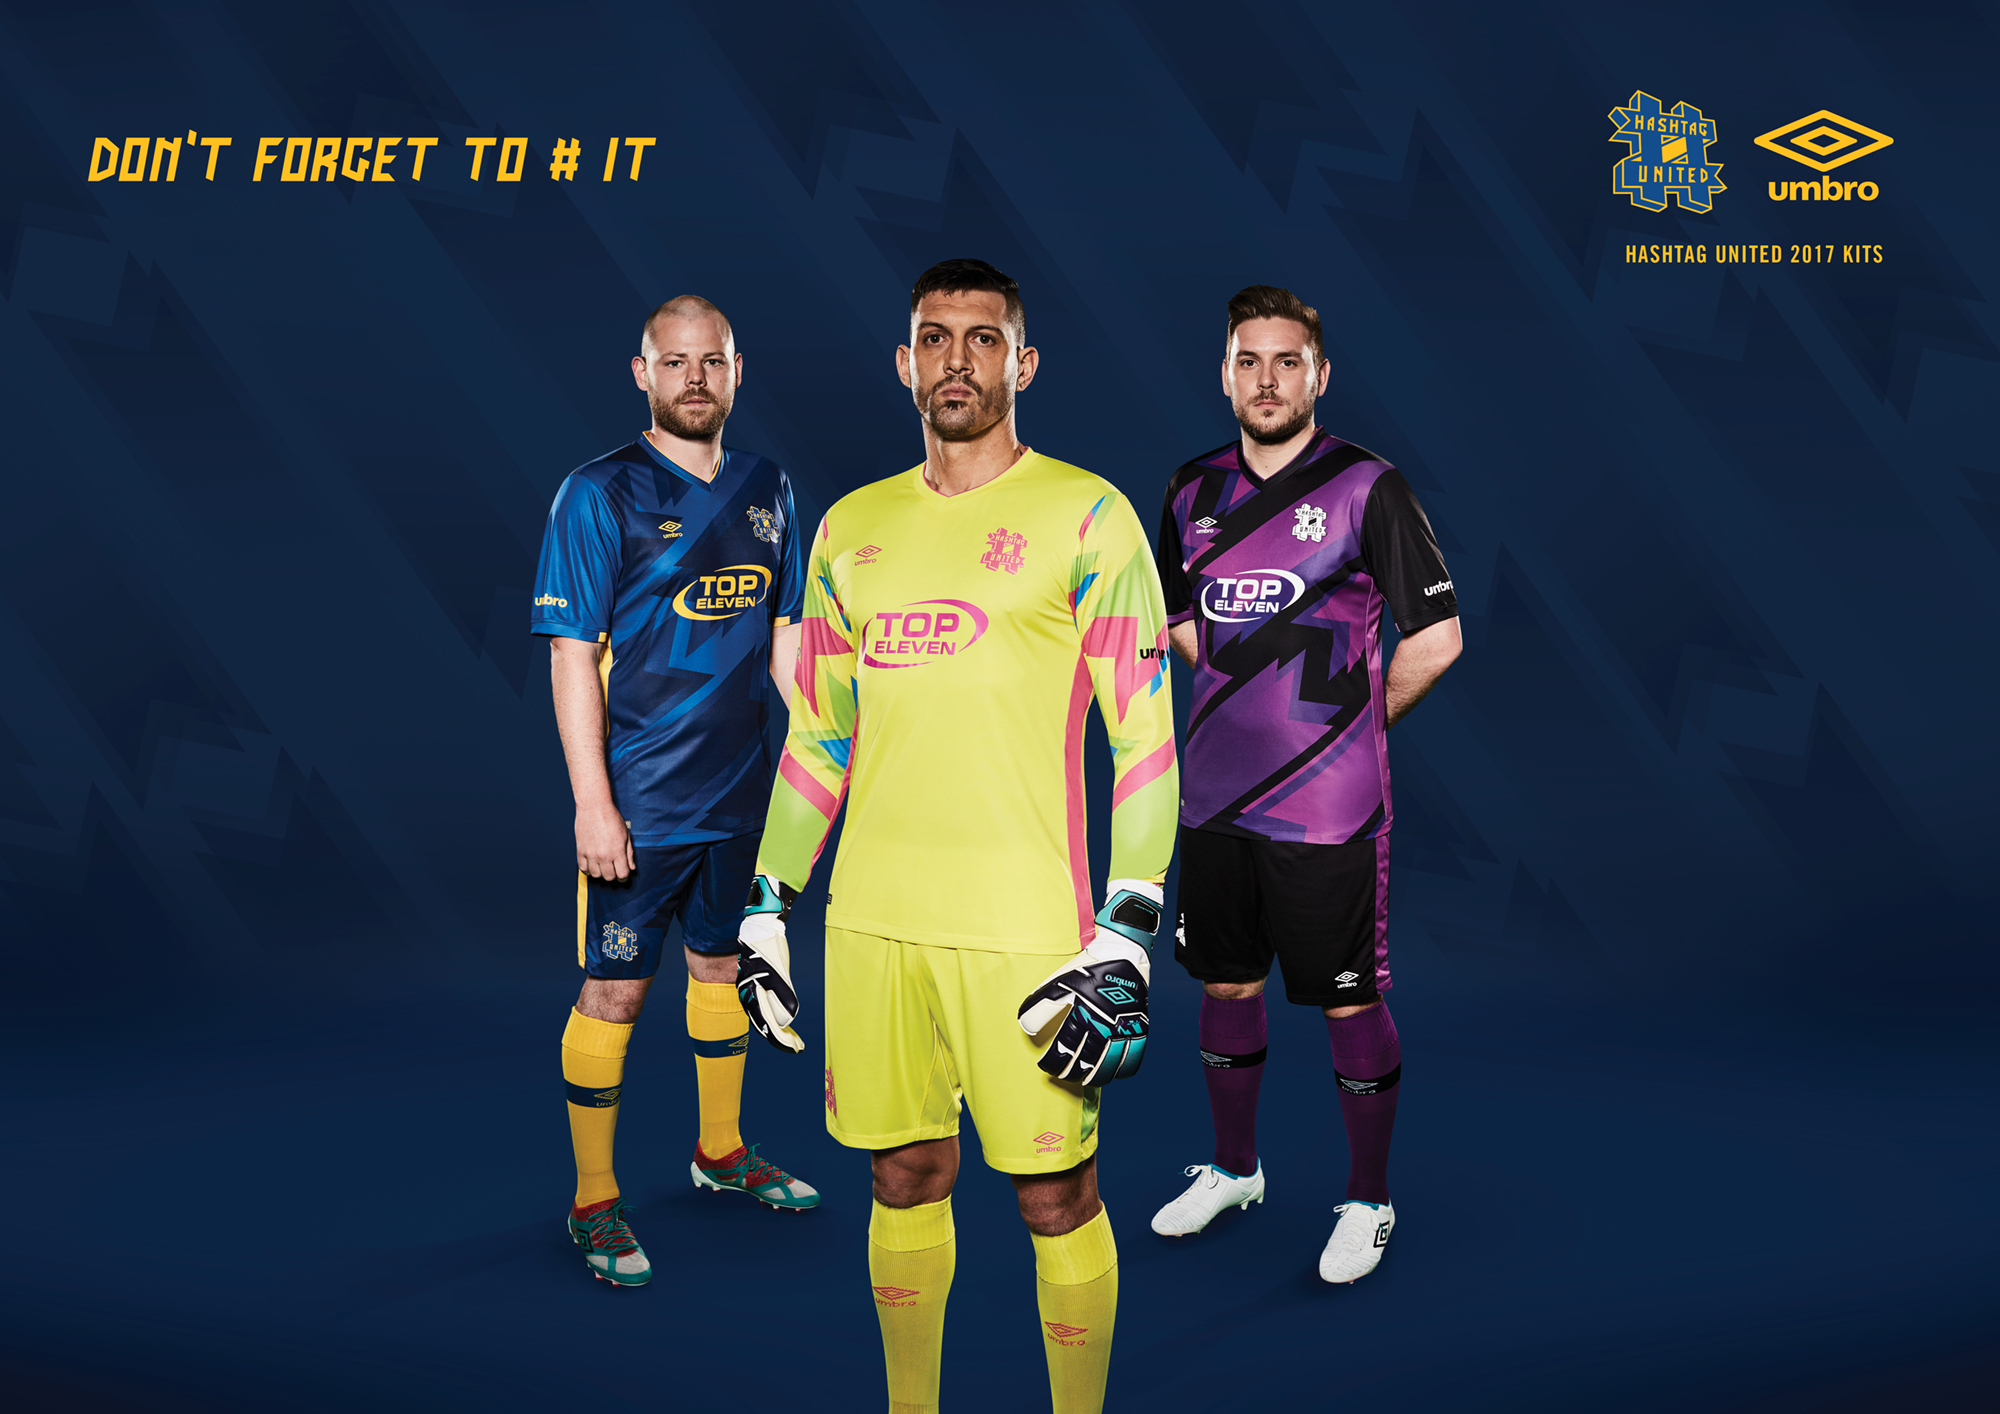 HASHTAG UNITED HOME AND AWAY BY UMBRO 